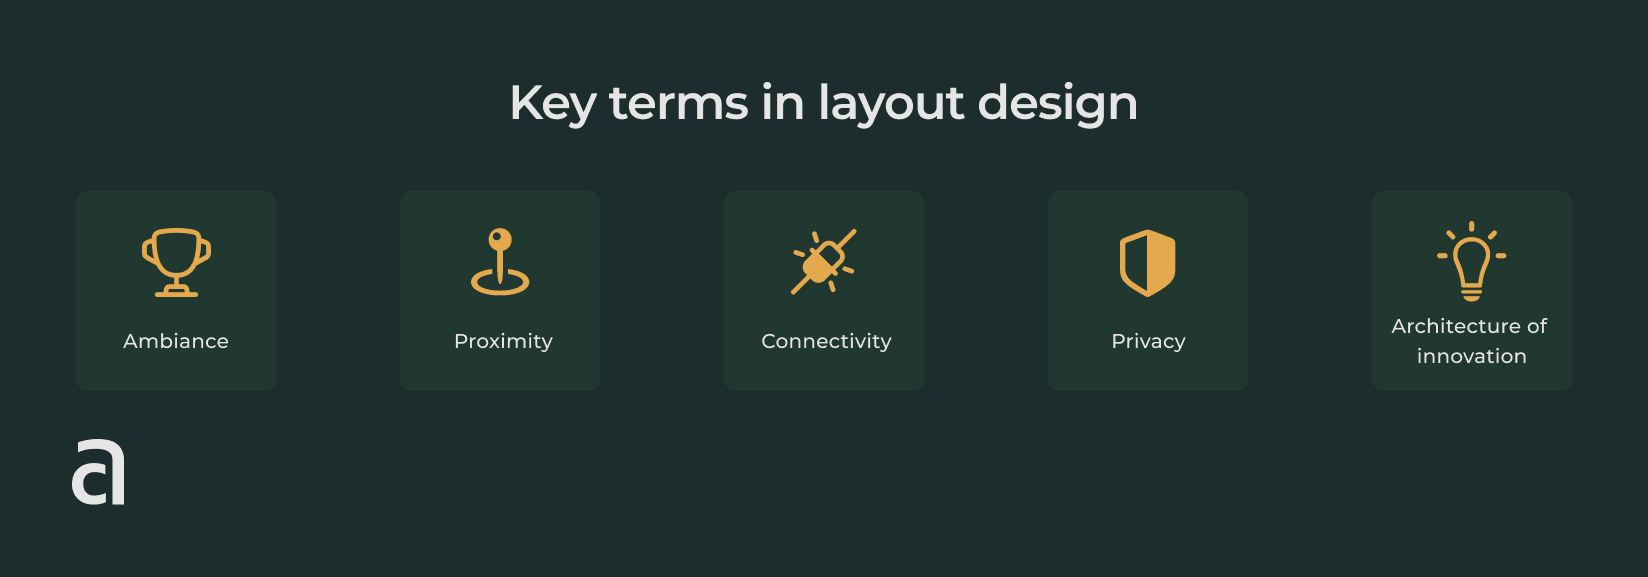 Key terms of coworking space layout design